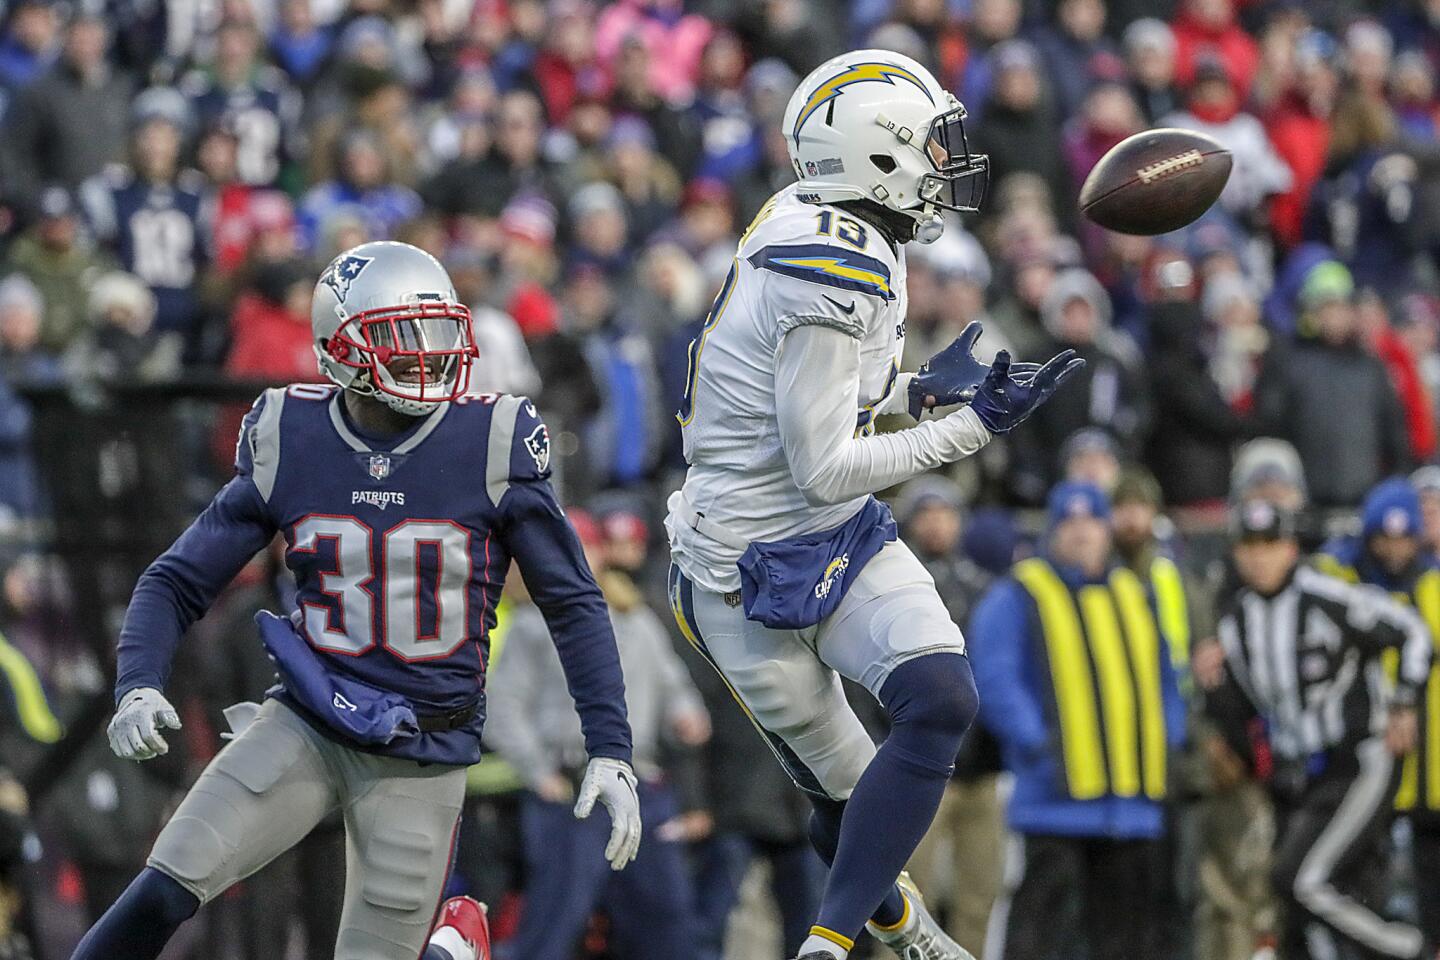 Chargers receiver Keenan Allen pulls in a 32-yard pass from Philip Rivers past New England Patriots defensive back Jason McCourty, setting up a first and goal in the fourth quarter in the NFL AFC Divisional Playoff at Gillette Stadium.